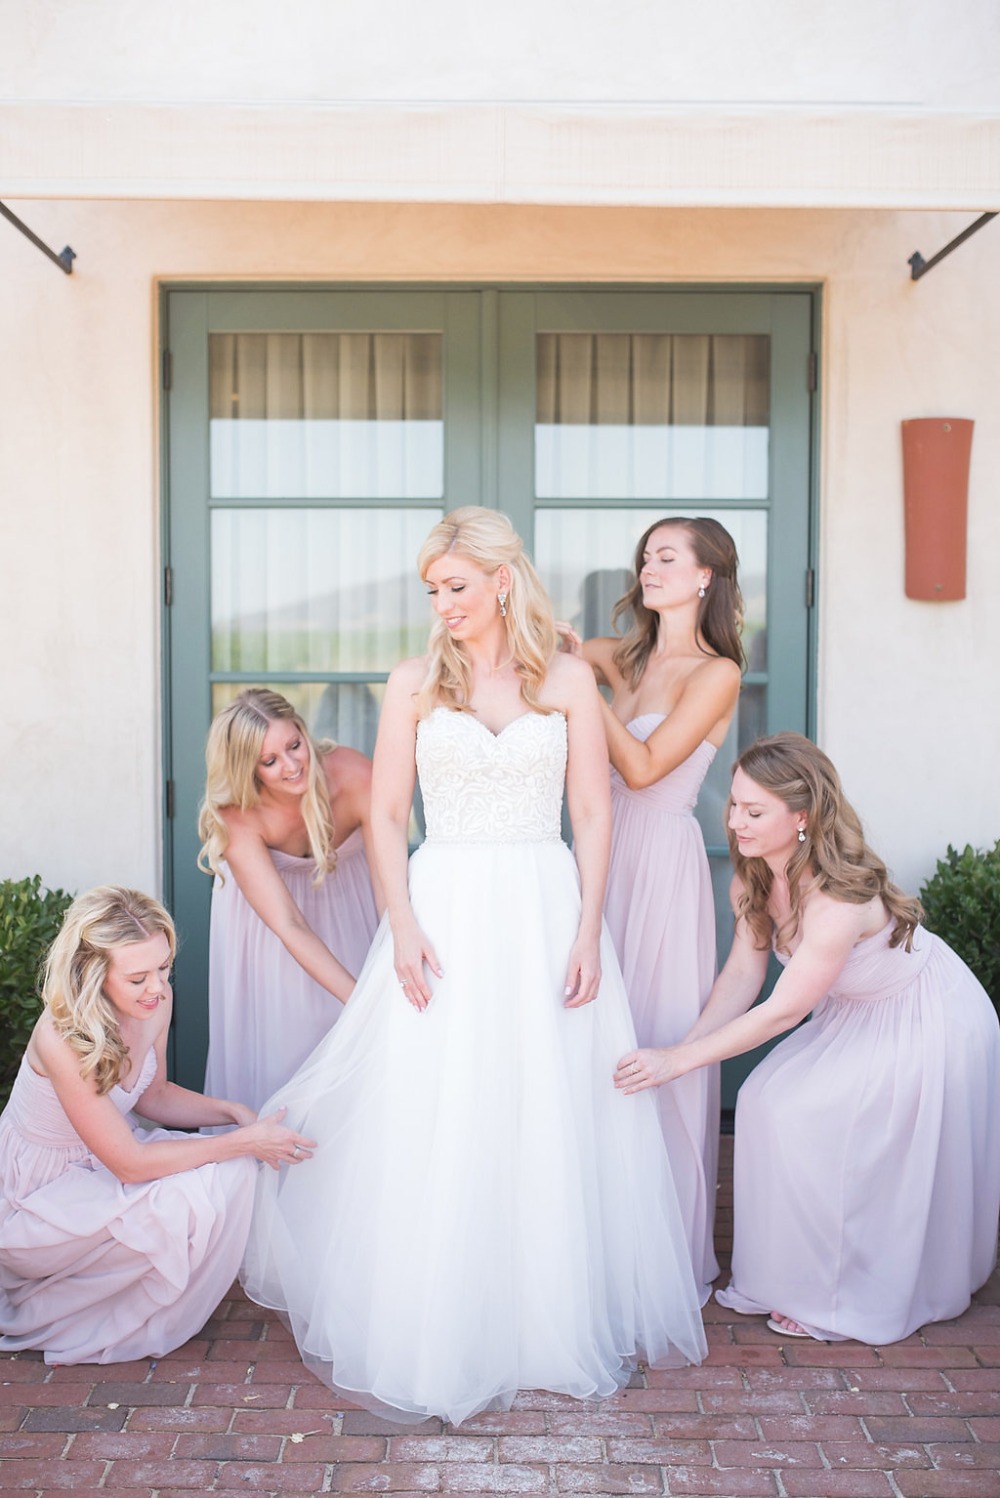 the bride in a beautiful Madison James wedding dress